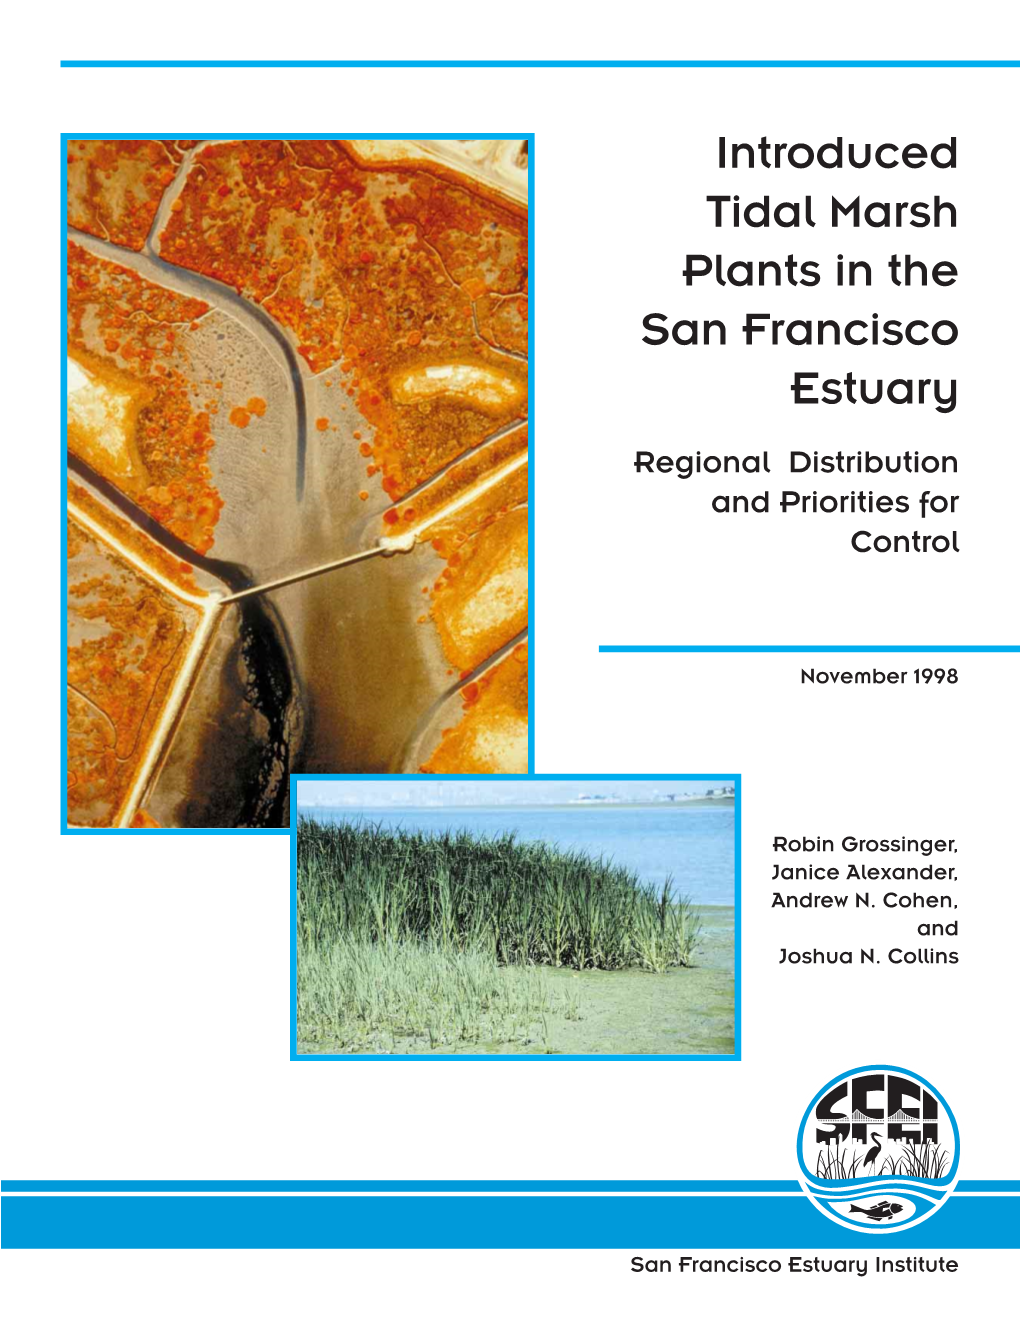 Introduced Tidal Marsh Plants in the San Francisco Estuary Regional Distribution and Priorities for Control